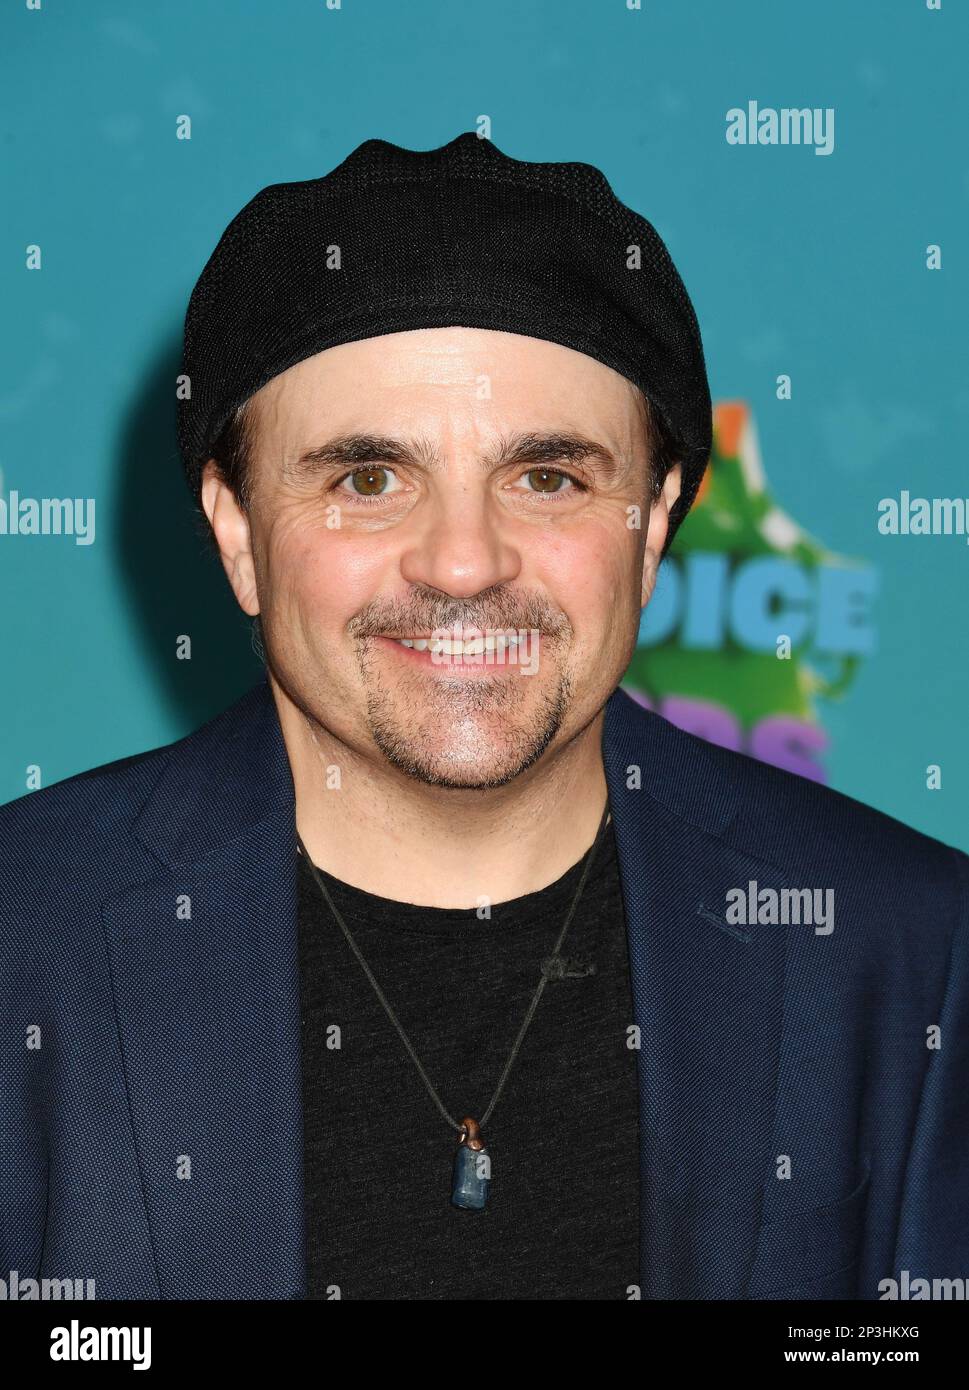 Los Angeles, California, USA. 04th Mar, 2023. Michael D. Cohen attends Nickelodeon's 2023 Kids' Choice Awards at Microsoft Theater on March 04, 2023 in Los Angeles, California. Credit: Jeffrey Mayer/Jtm Photos/Media Punch/Alamy Live News Stock Photo